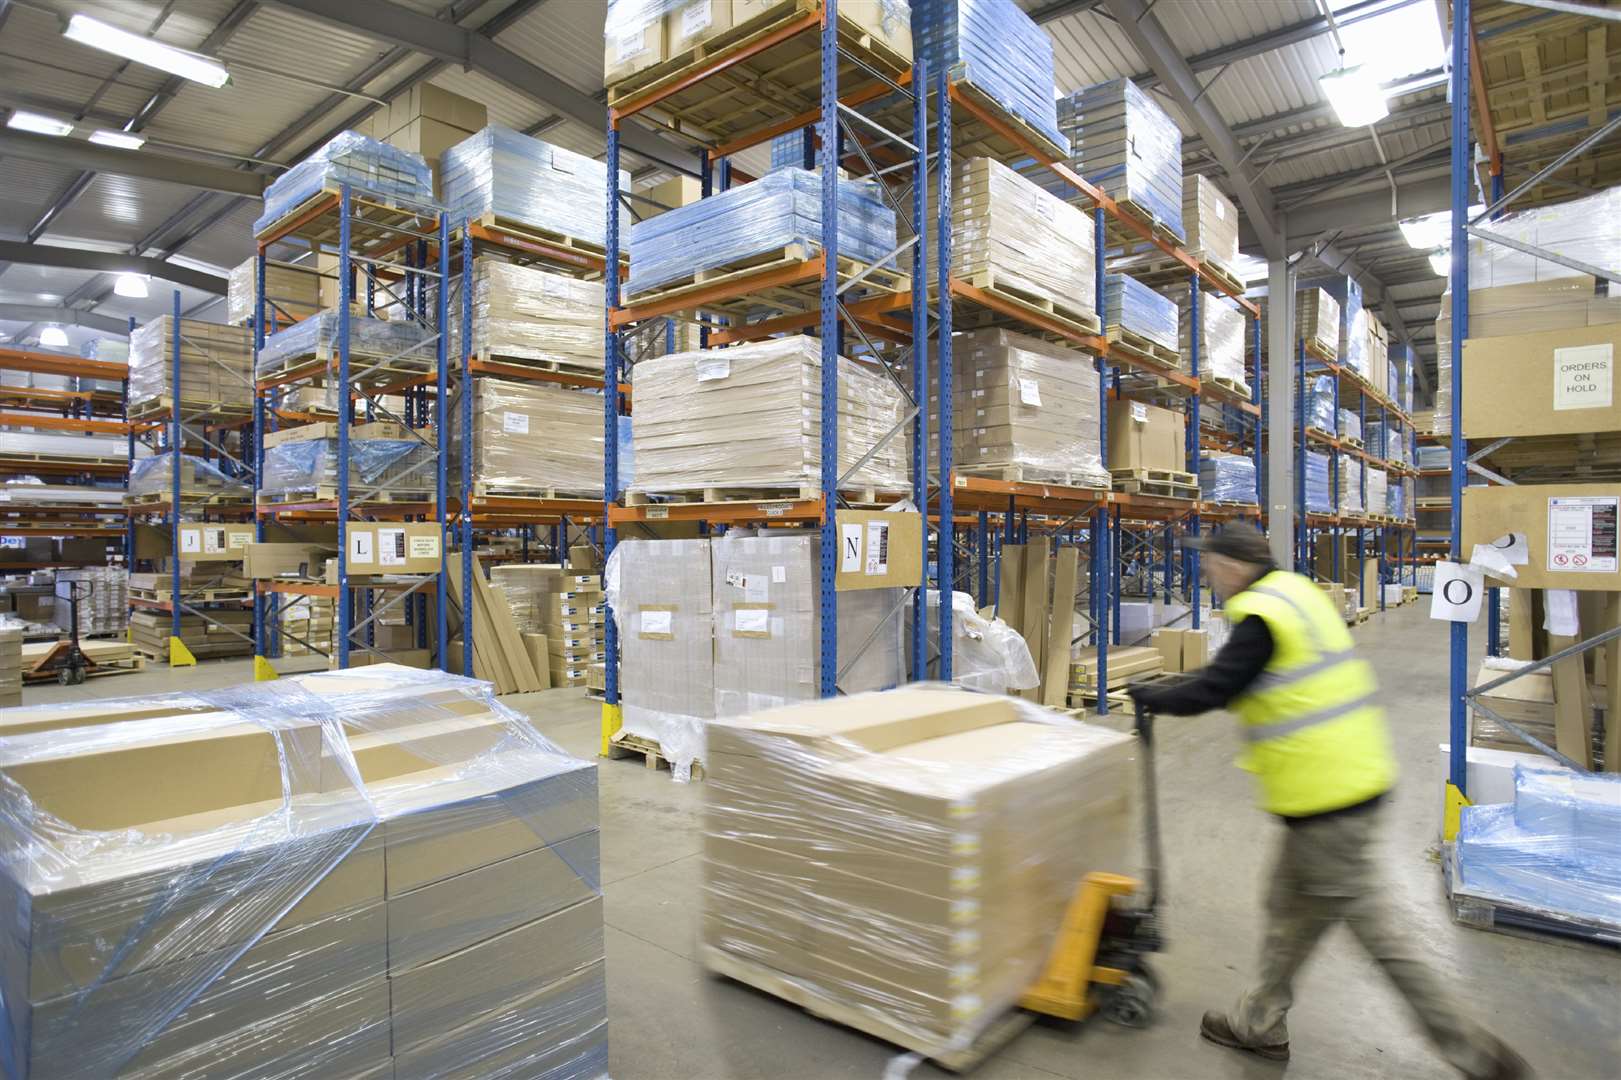 The warehousing know-how will strengthen the presence of both firms in the South of England. Picture: www.istockphoto.com